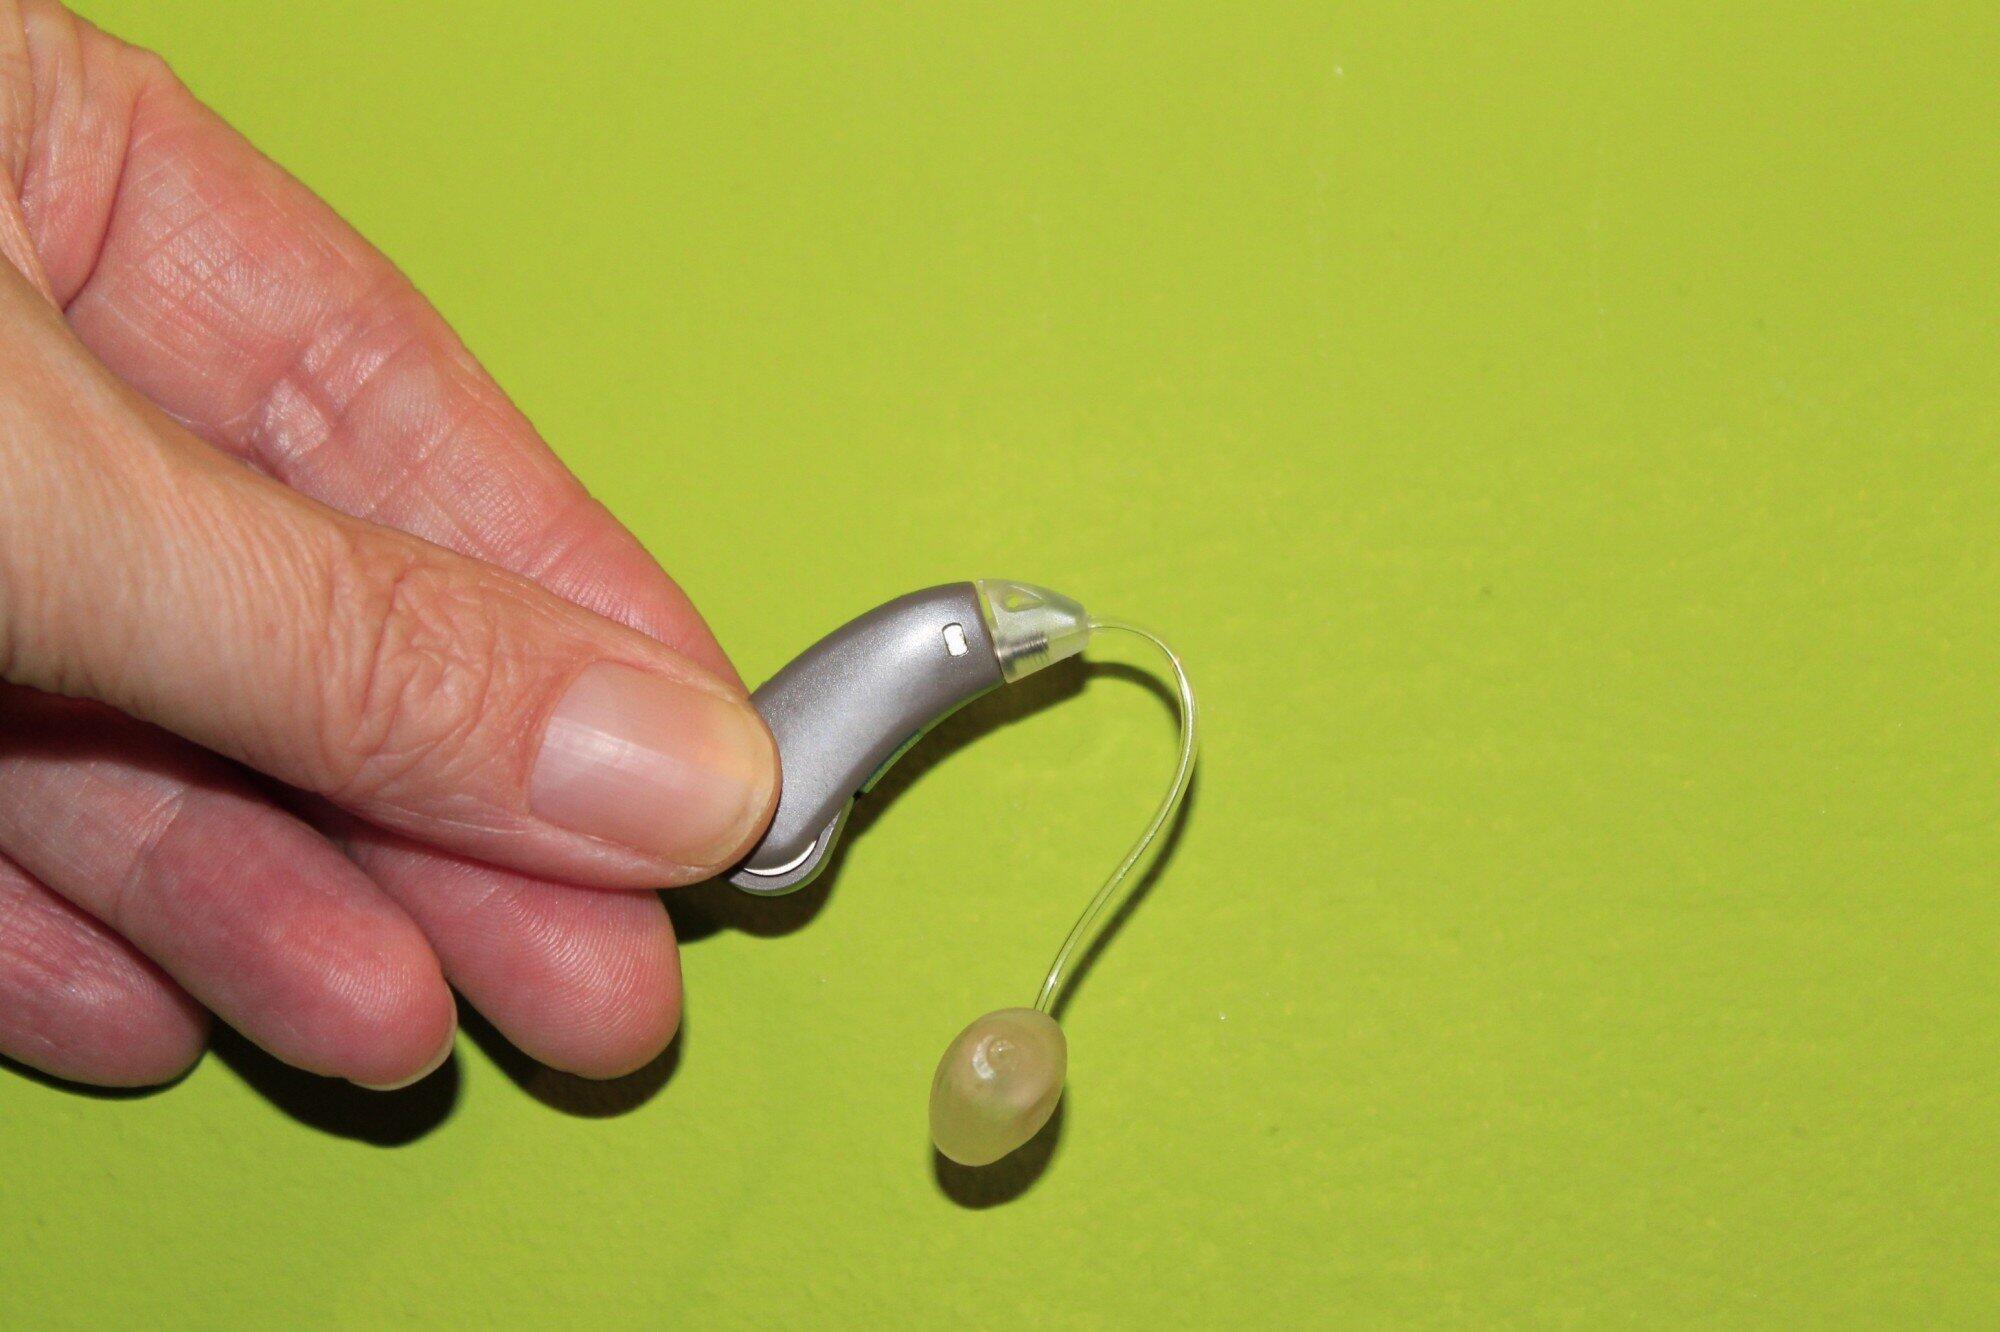 Sleek and Discreet: The Latest Technology in Hearing Aids